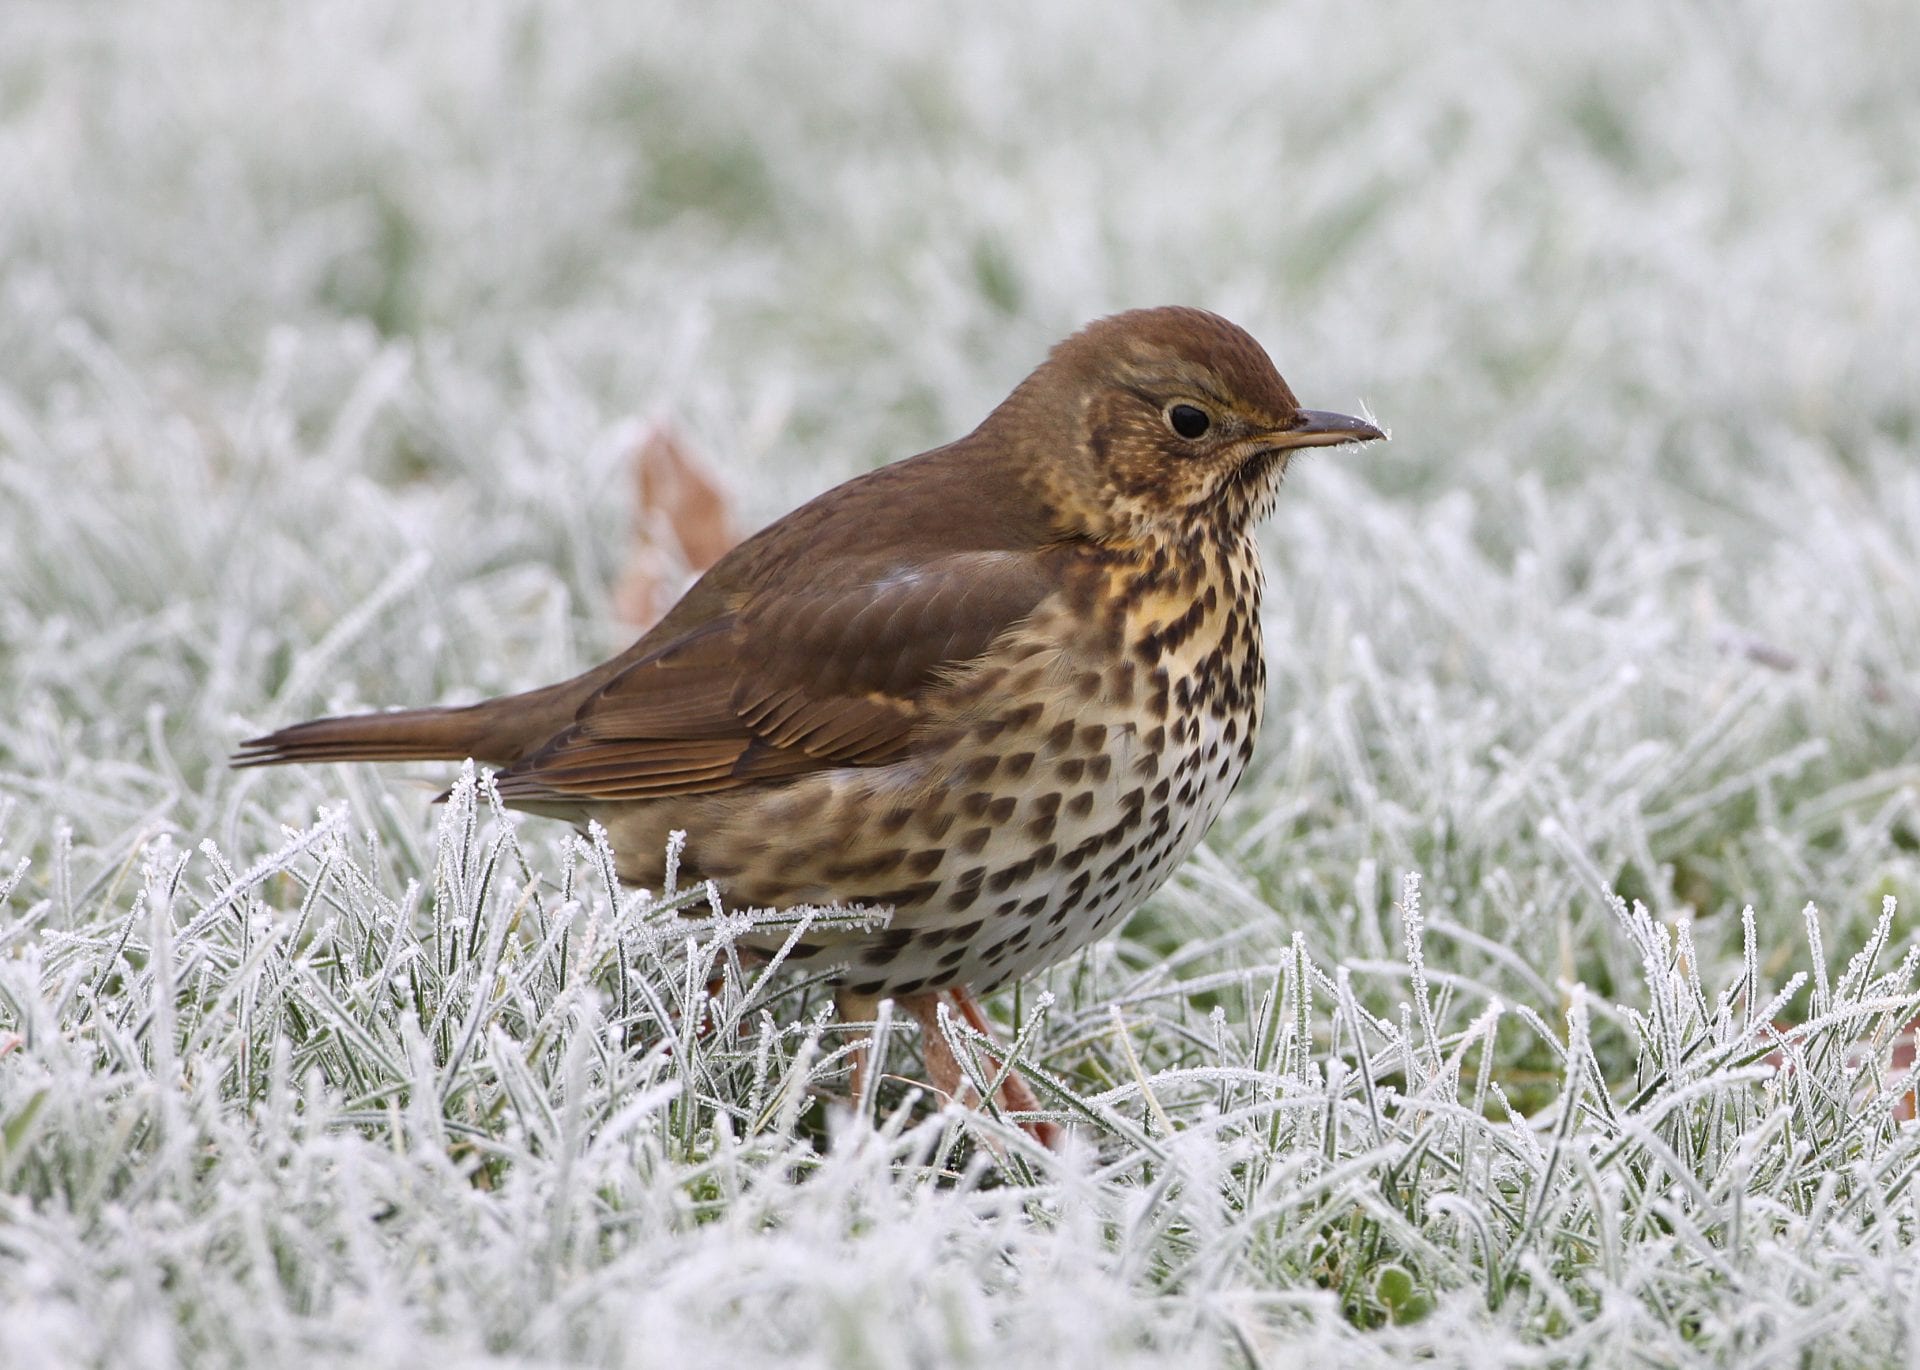 song-thrush-standing-on-icy-grass